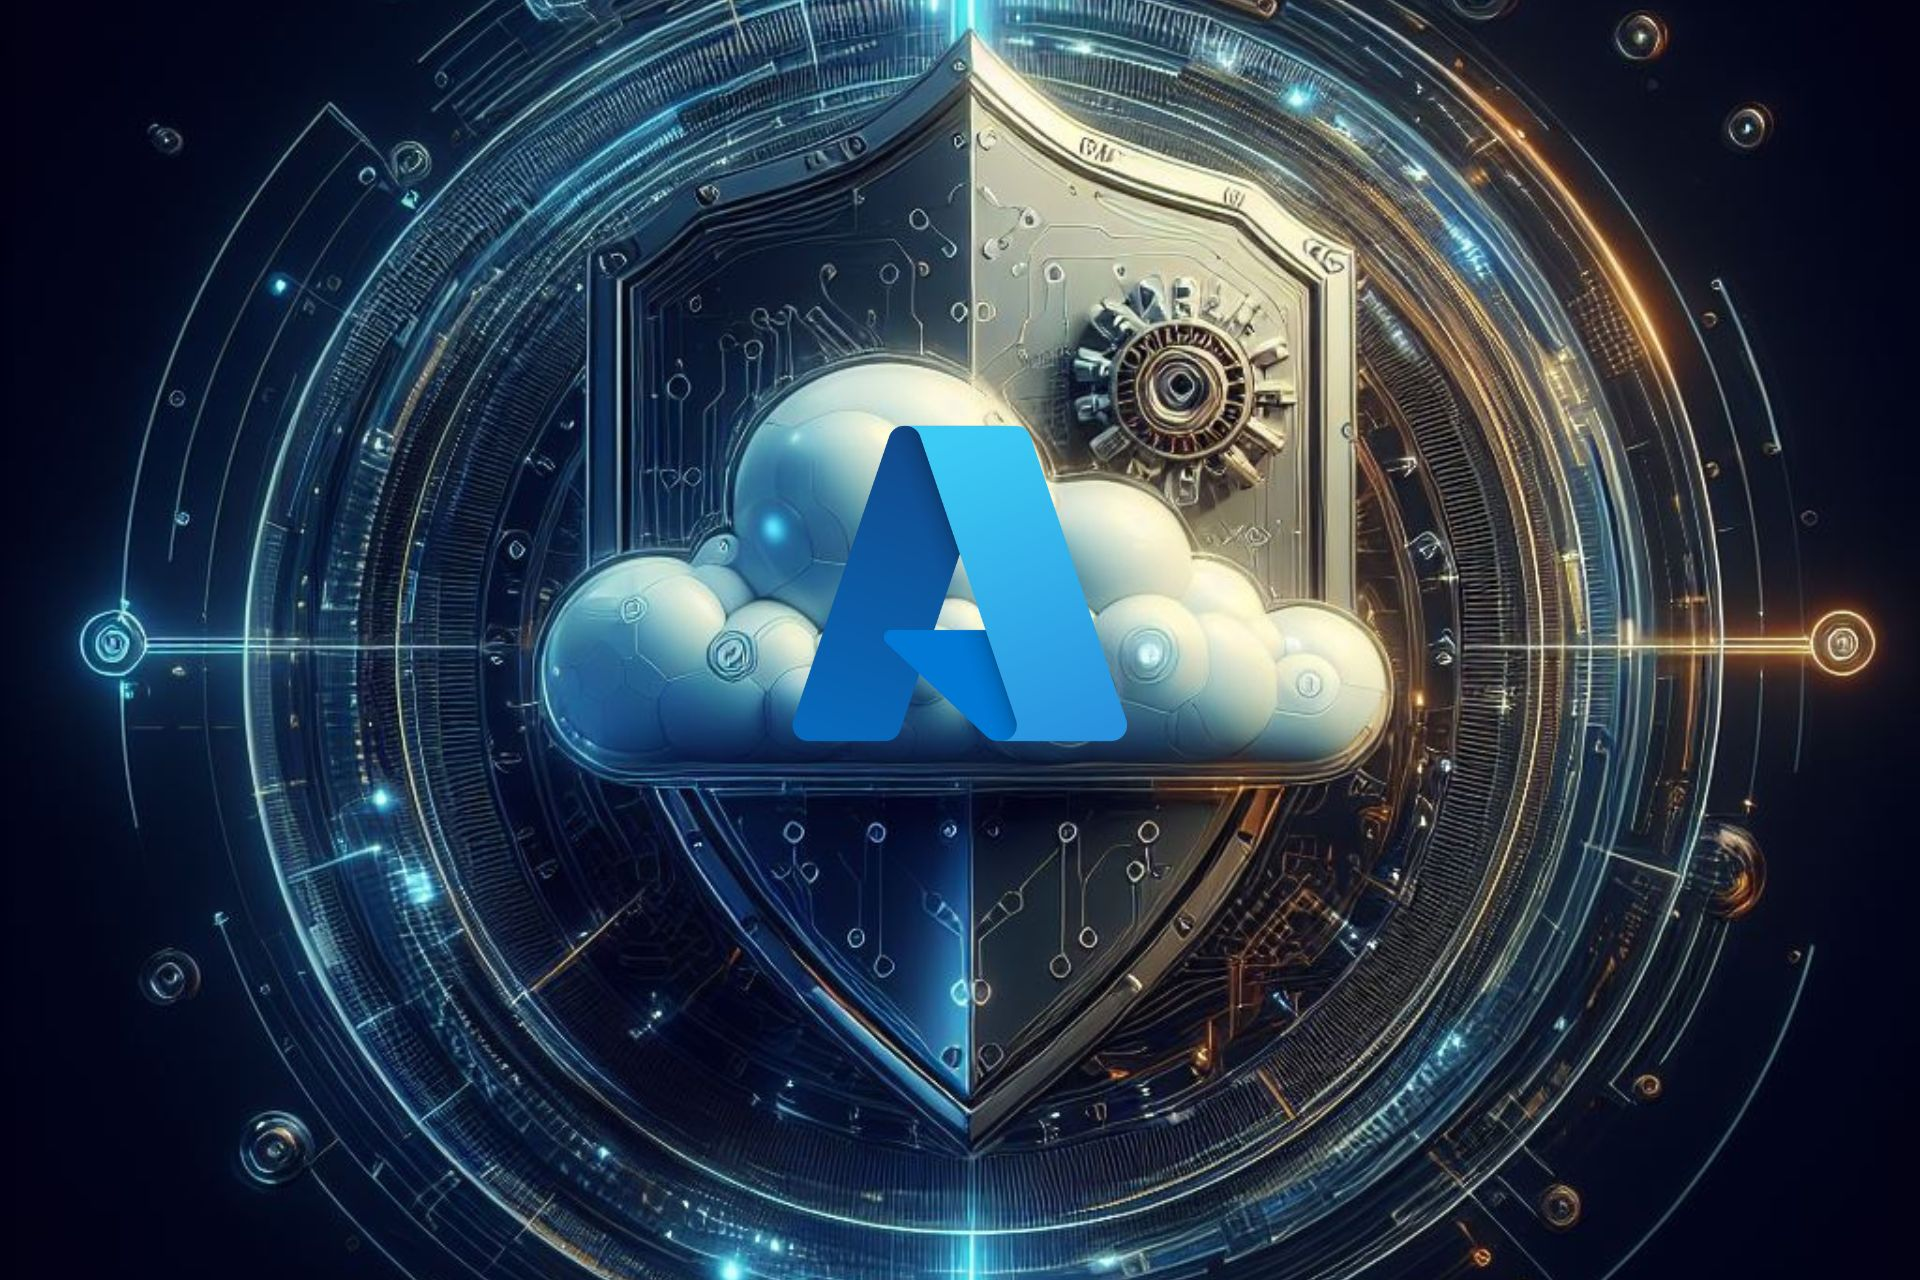 The new Azure safety features will protect your AI model and generations